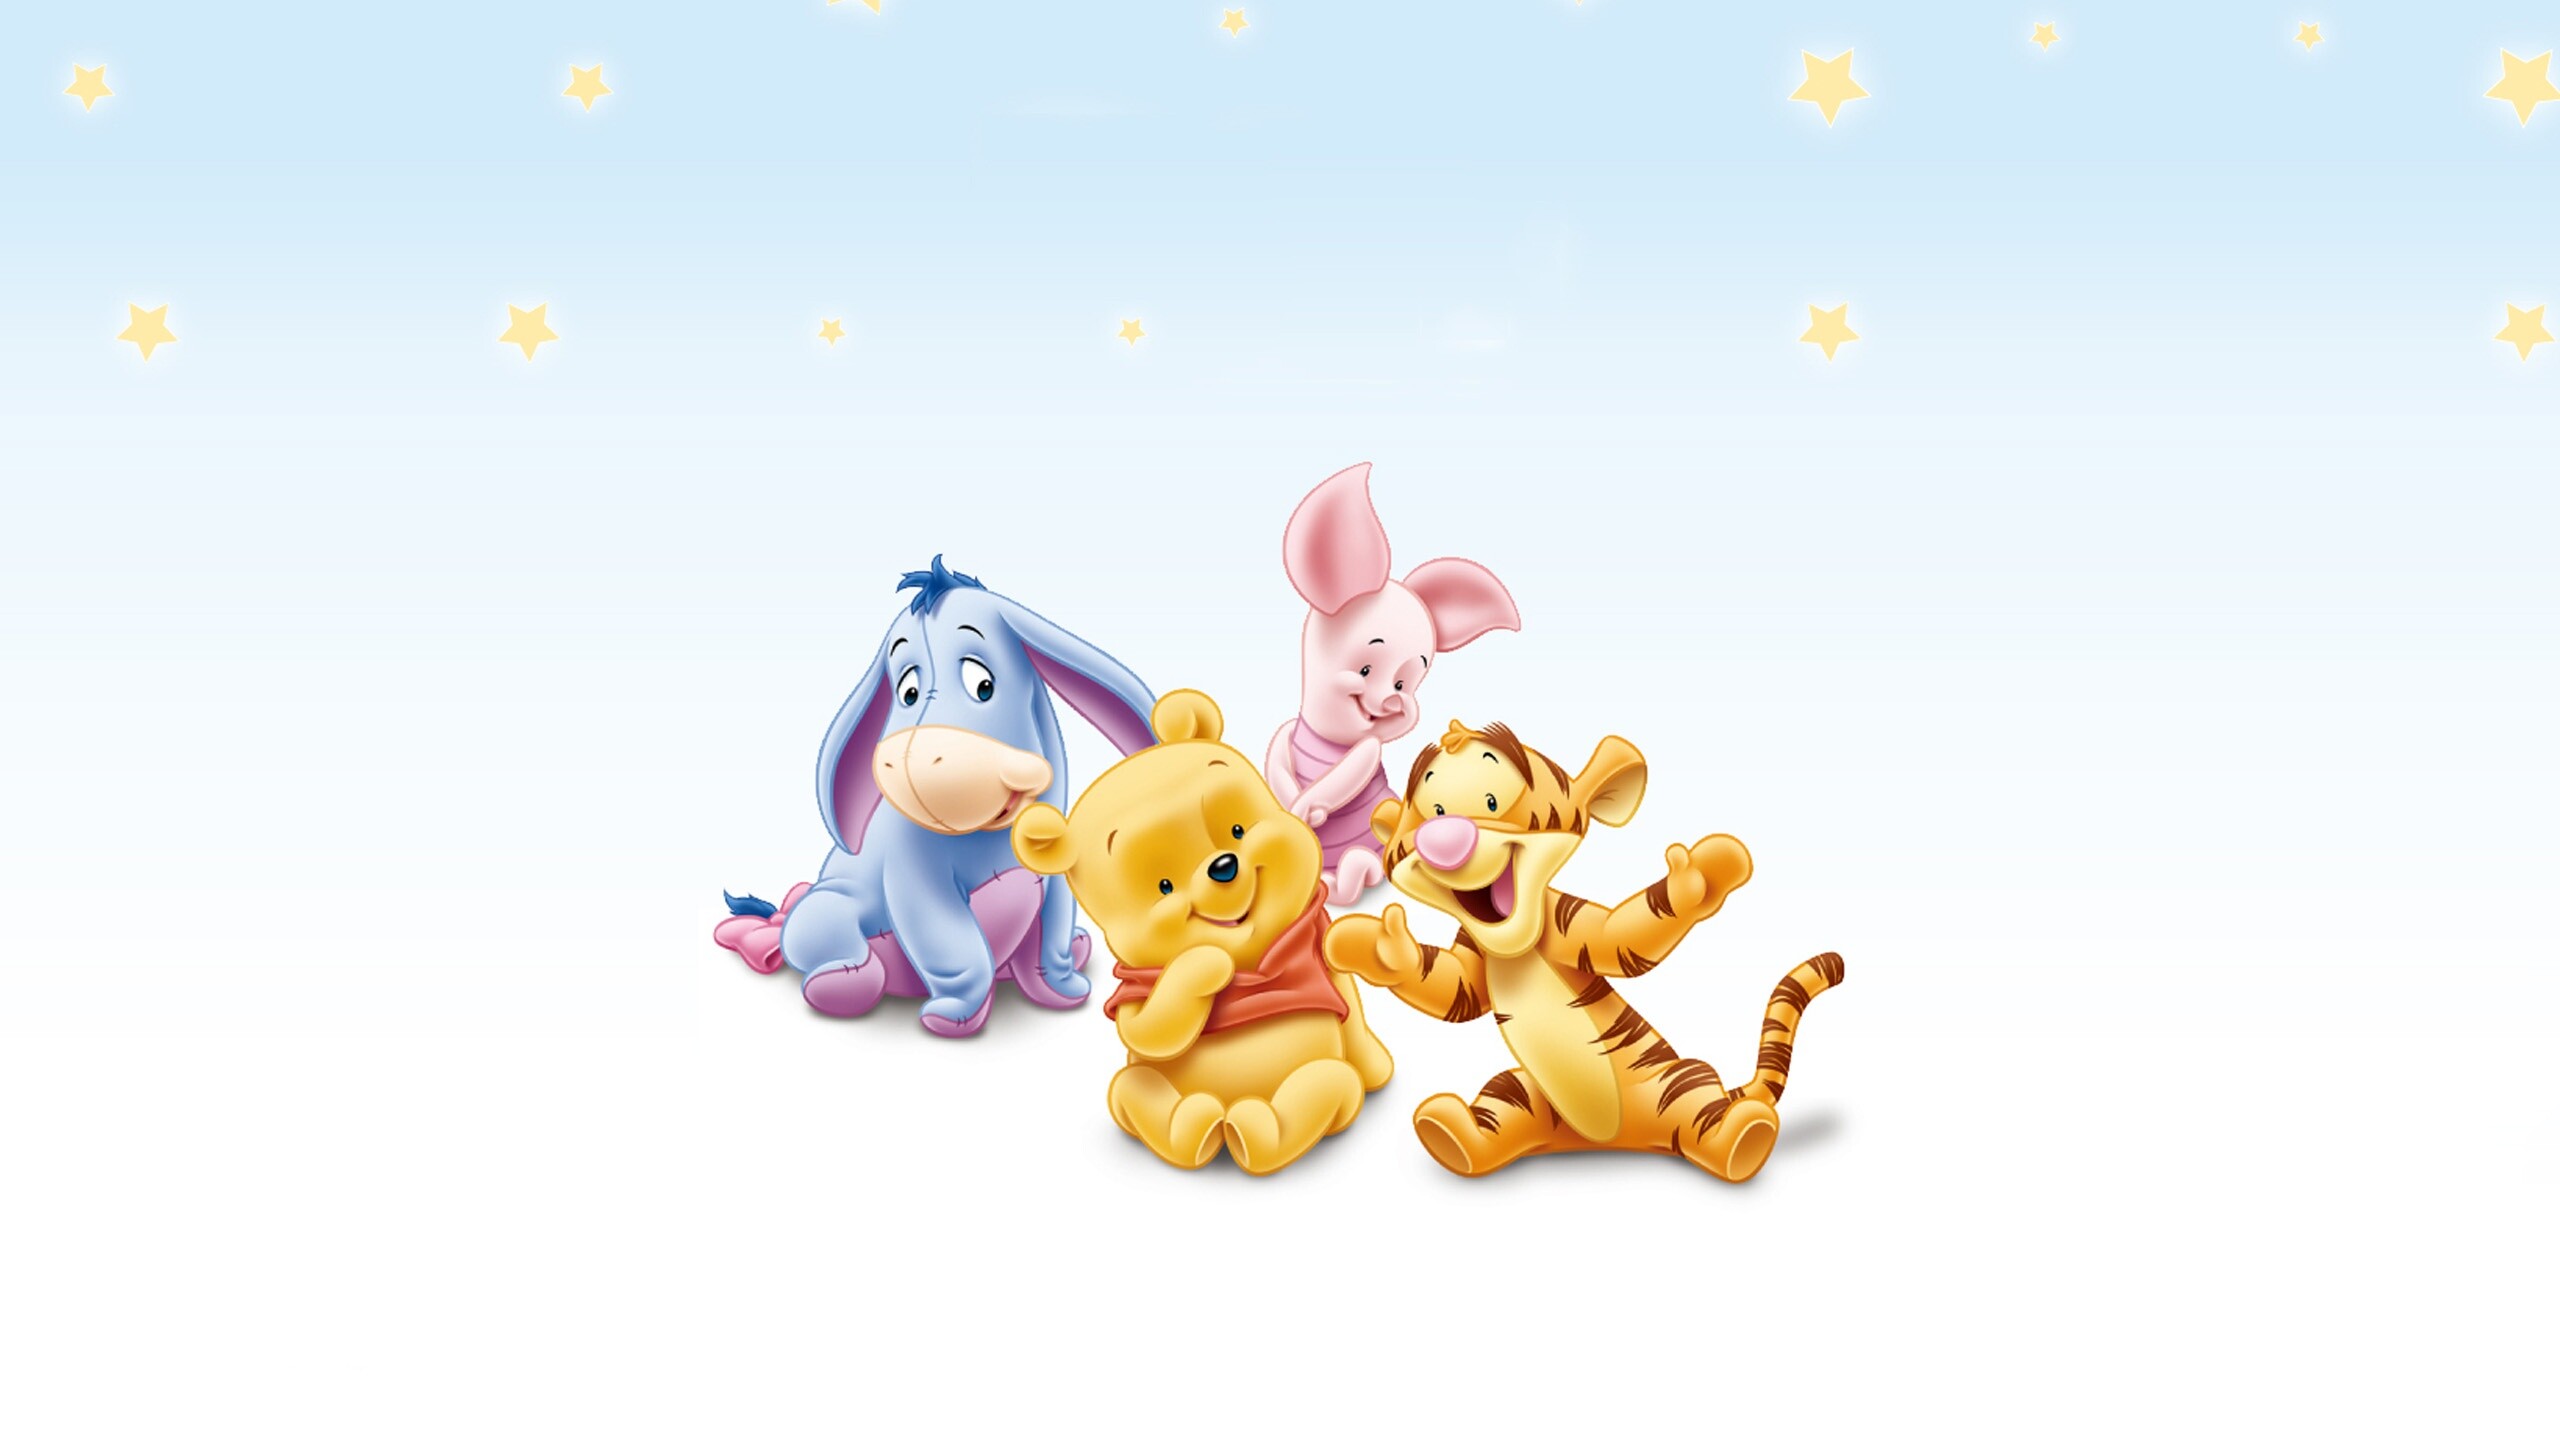 The Many Adventures of Winnie the Pooh: Its characters have spawned a franchise of various sequels and television programs, clothing, books, toys, and an attraction of the same name at Disneyland, Walt Disney World, and Hong Kong Disneyland in addition to Pooh's Hunny Hunt in Tokyo Disneyland. 2560x1440 HD Background.